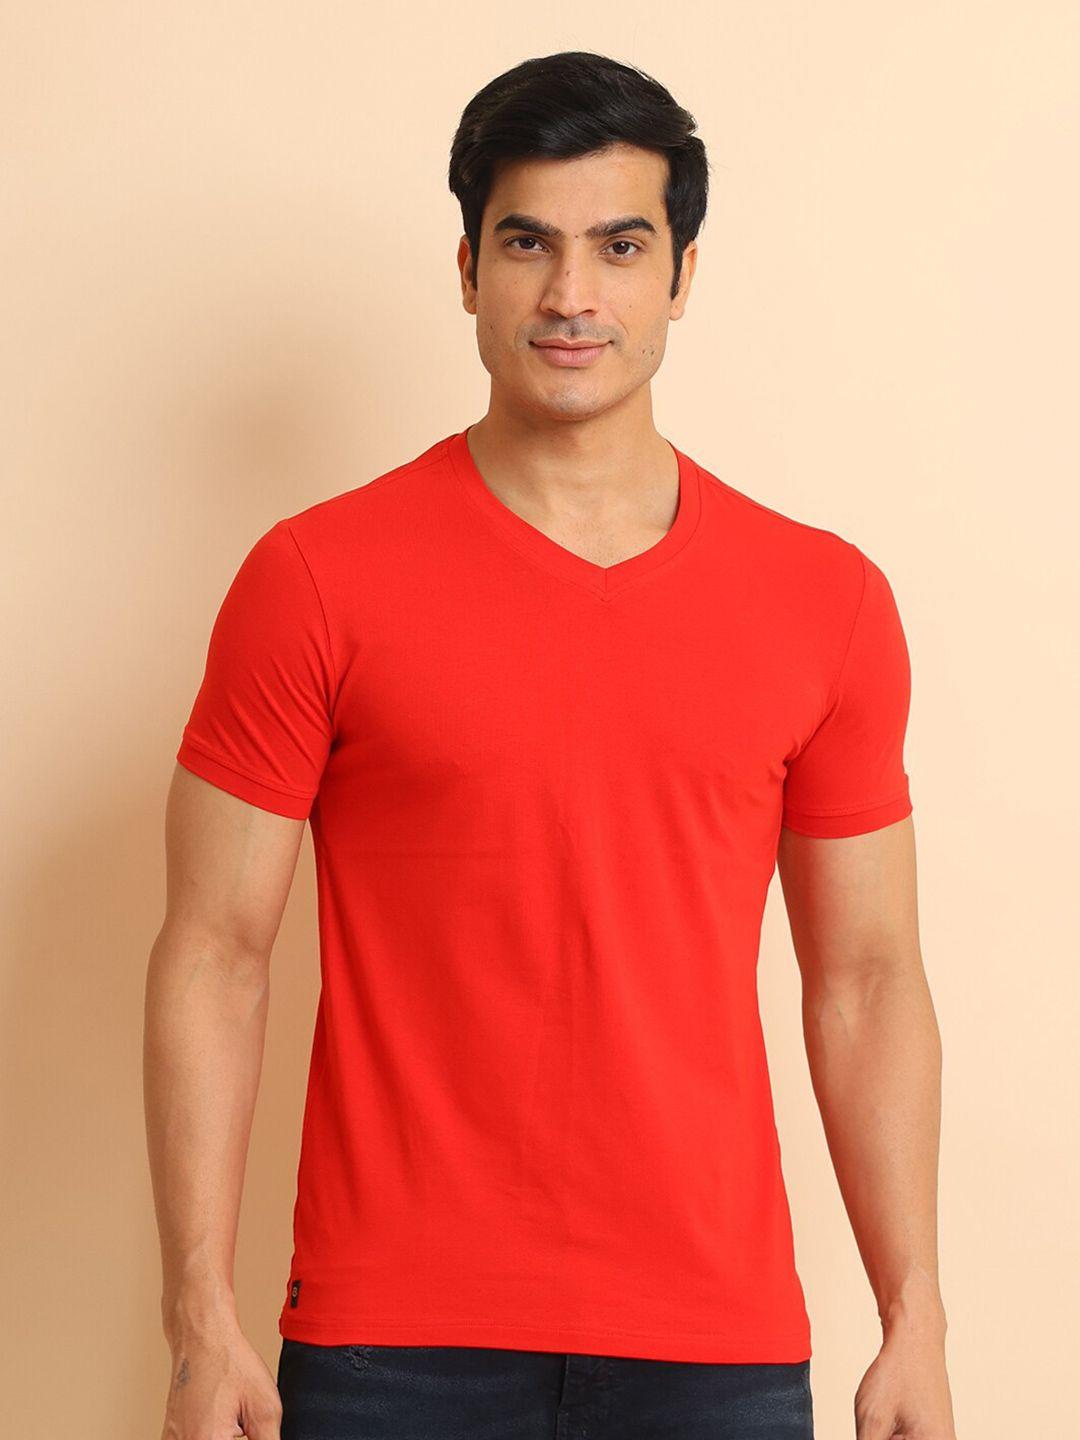 berry blues v-neck short sleeves casual cotton t-shirt